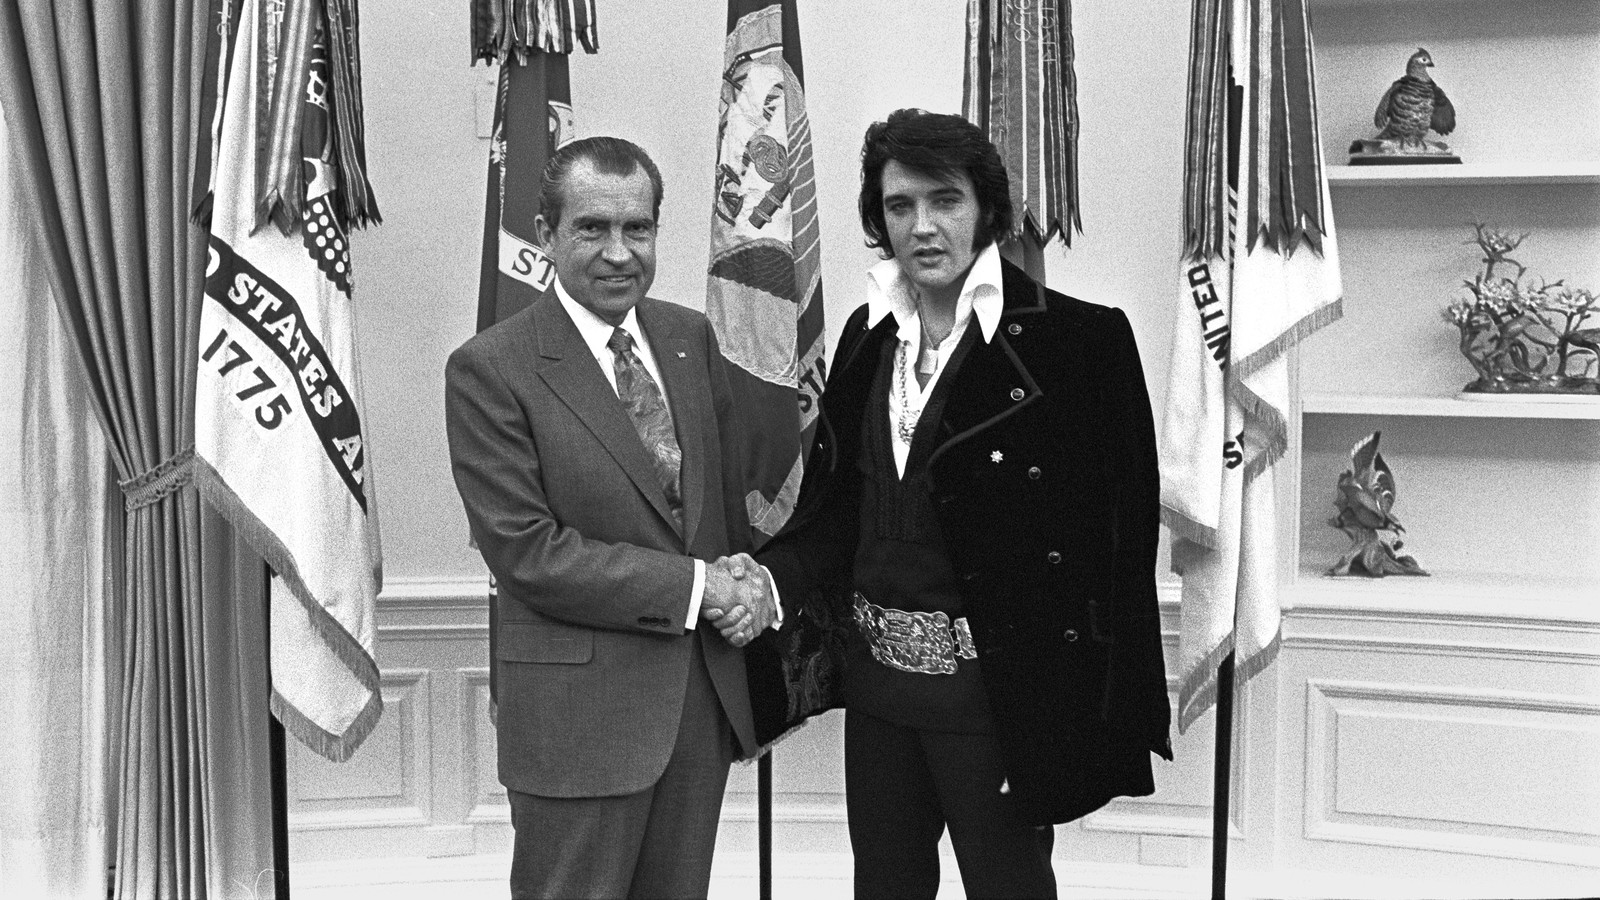 All kinds of Geology Perpetrator Trump Awards Elvis and Babe Ruth the Medal of Freedom - The Atlantic